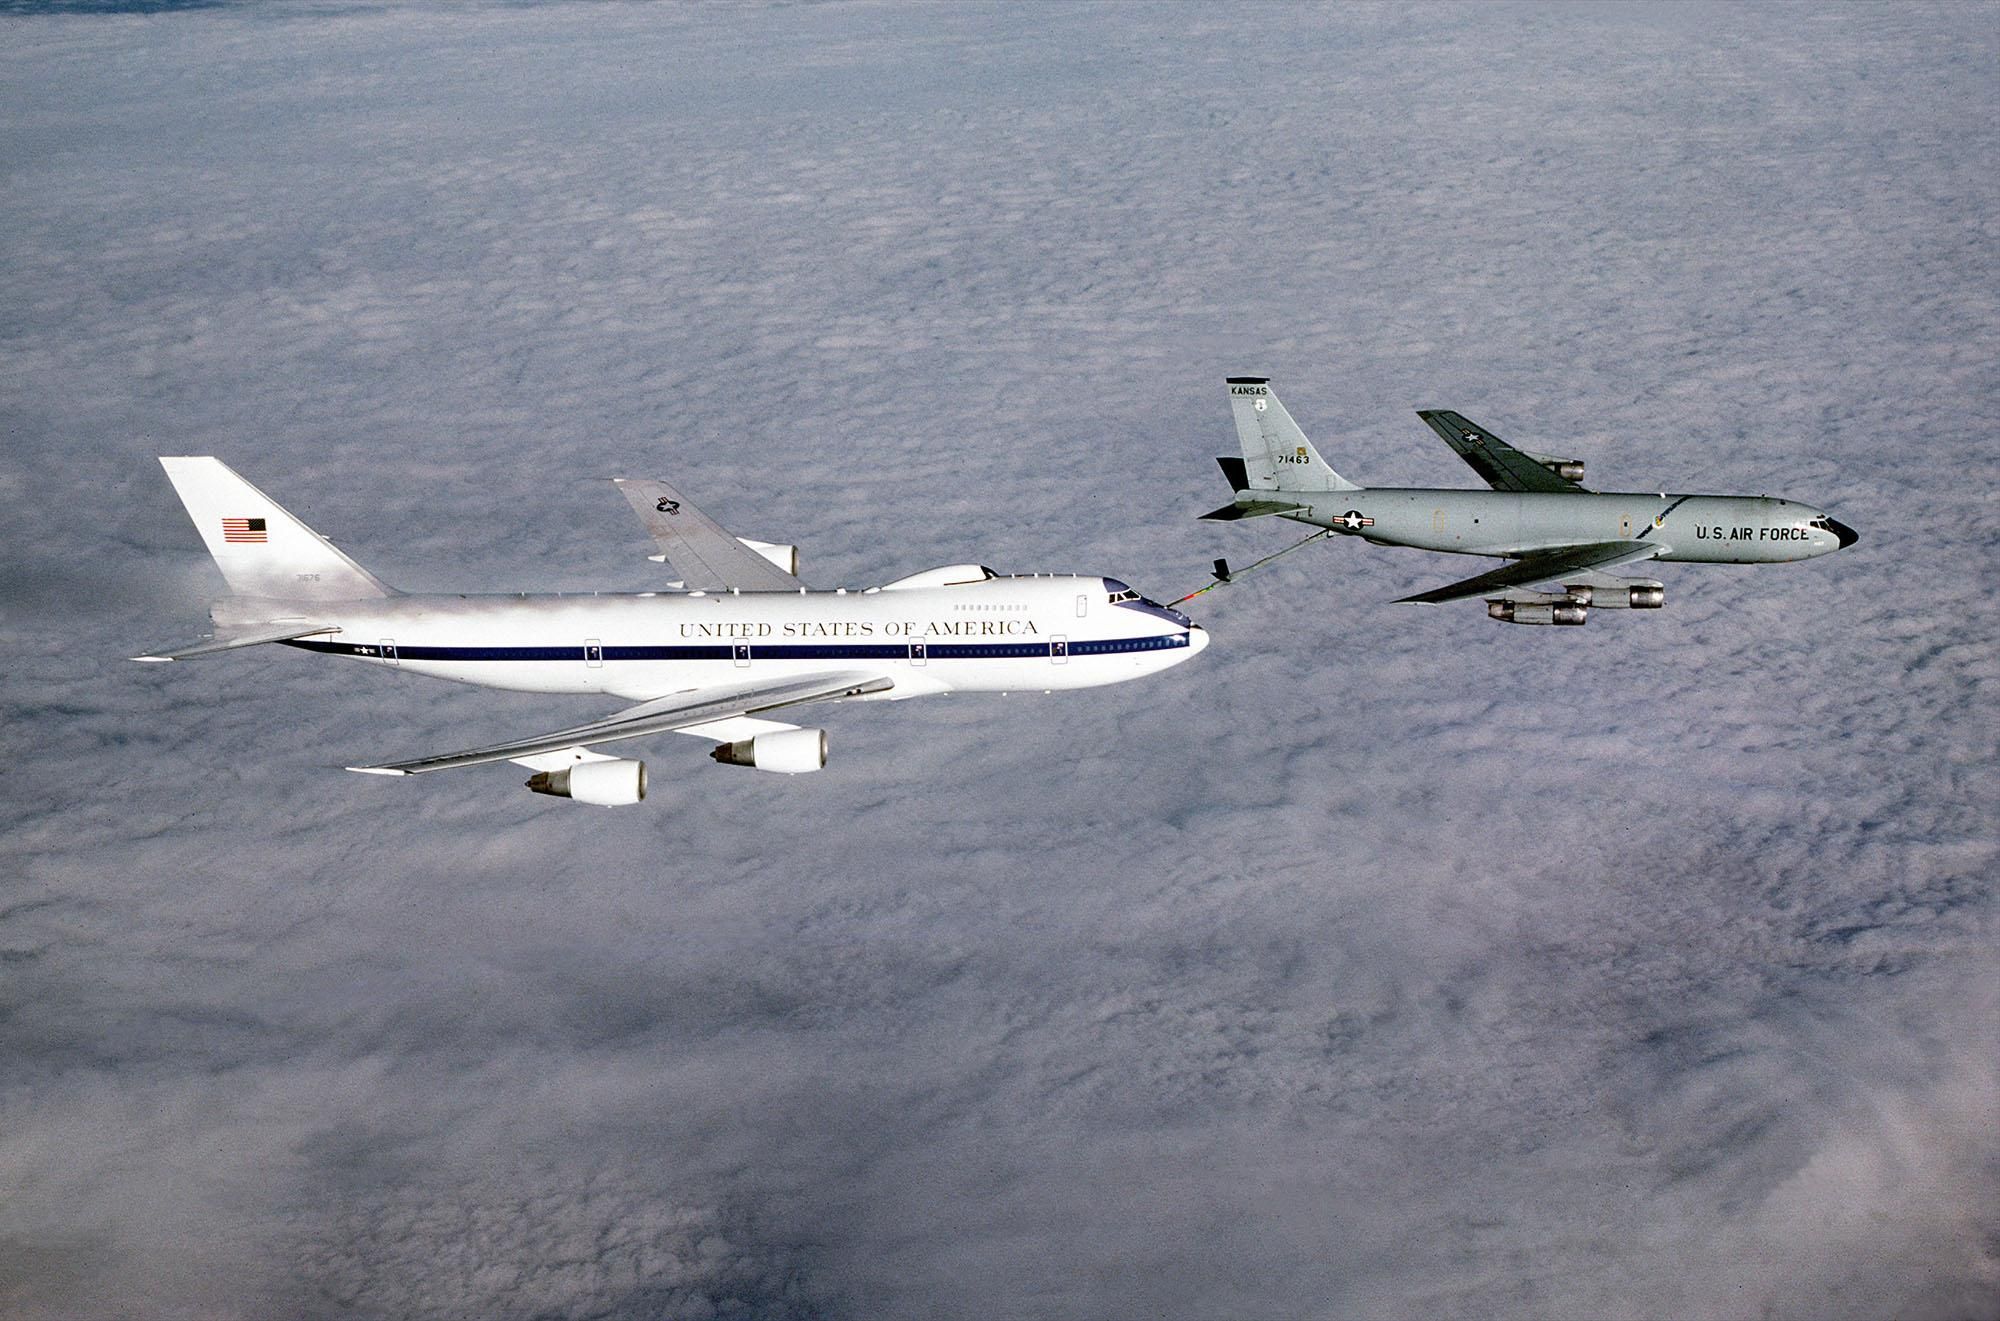 An air-to-air right side view of an E-4B advanced airborne national command post aircraft being refueled from a KC-135 Stratotanker aircraft.